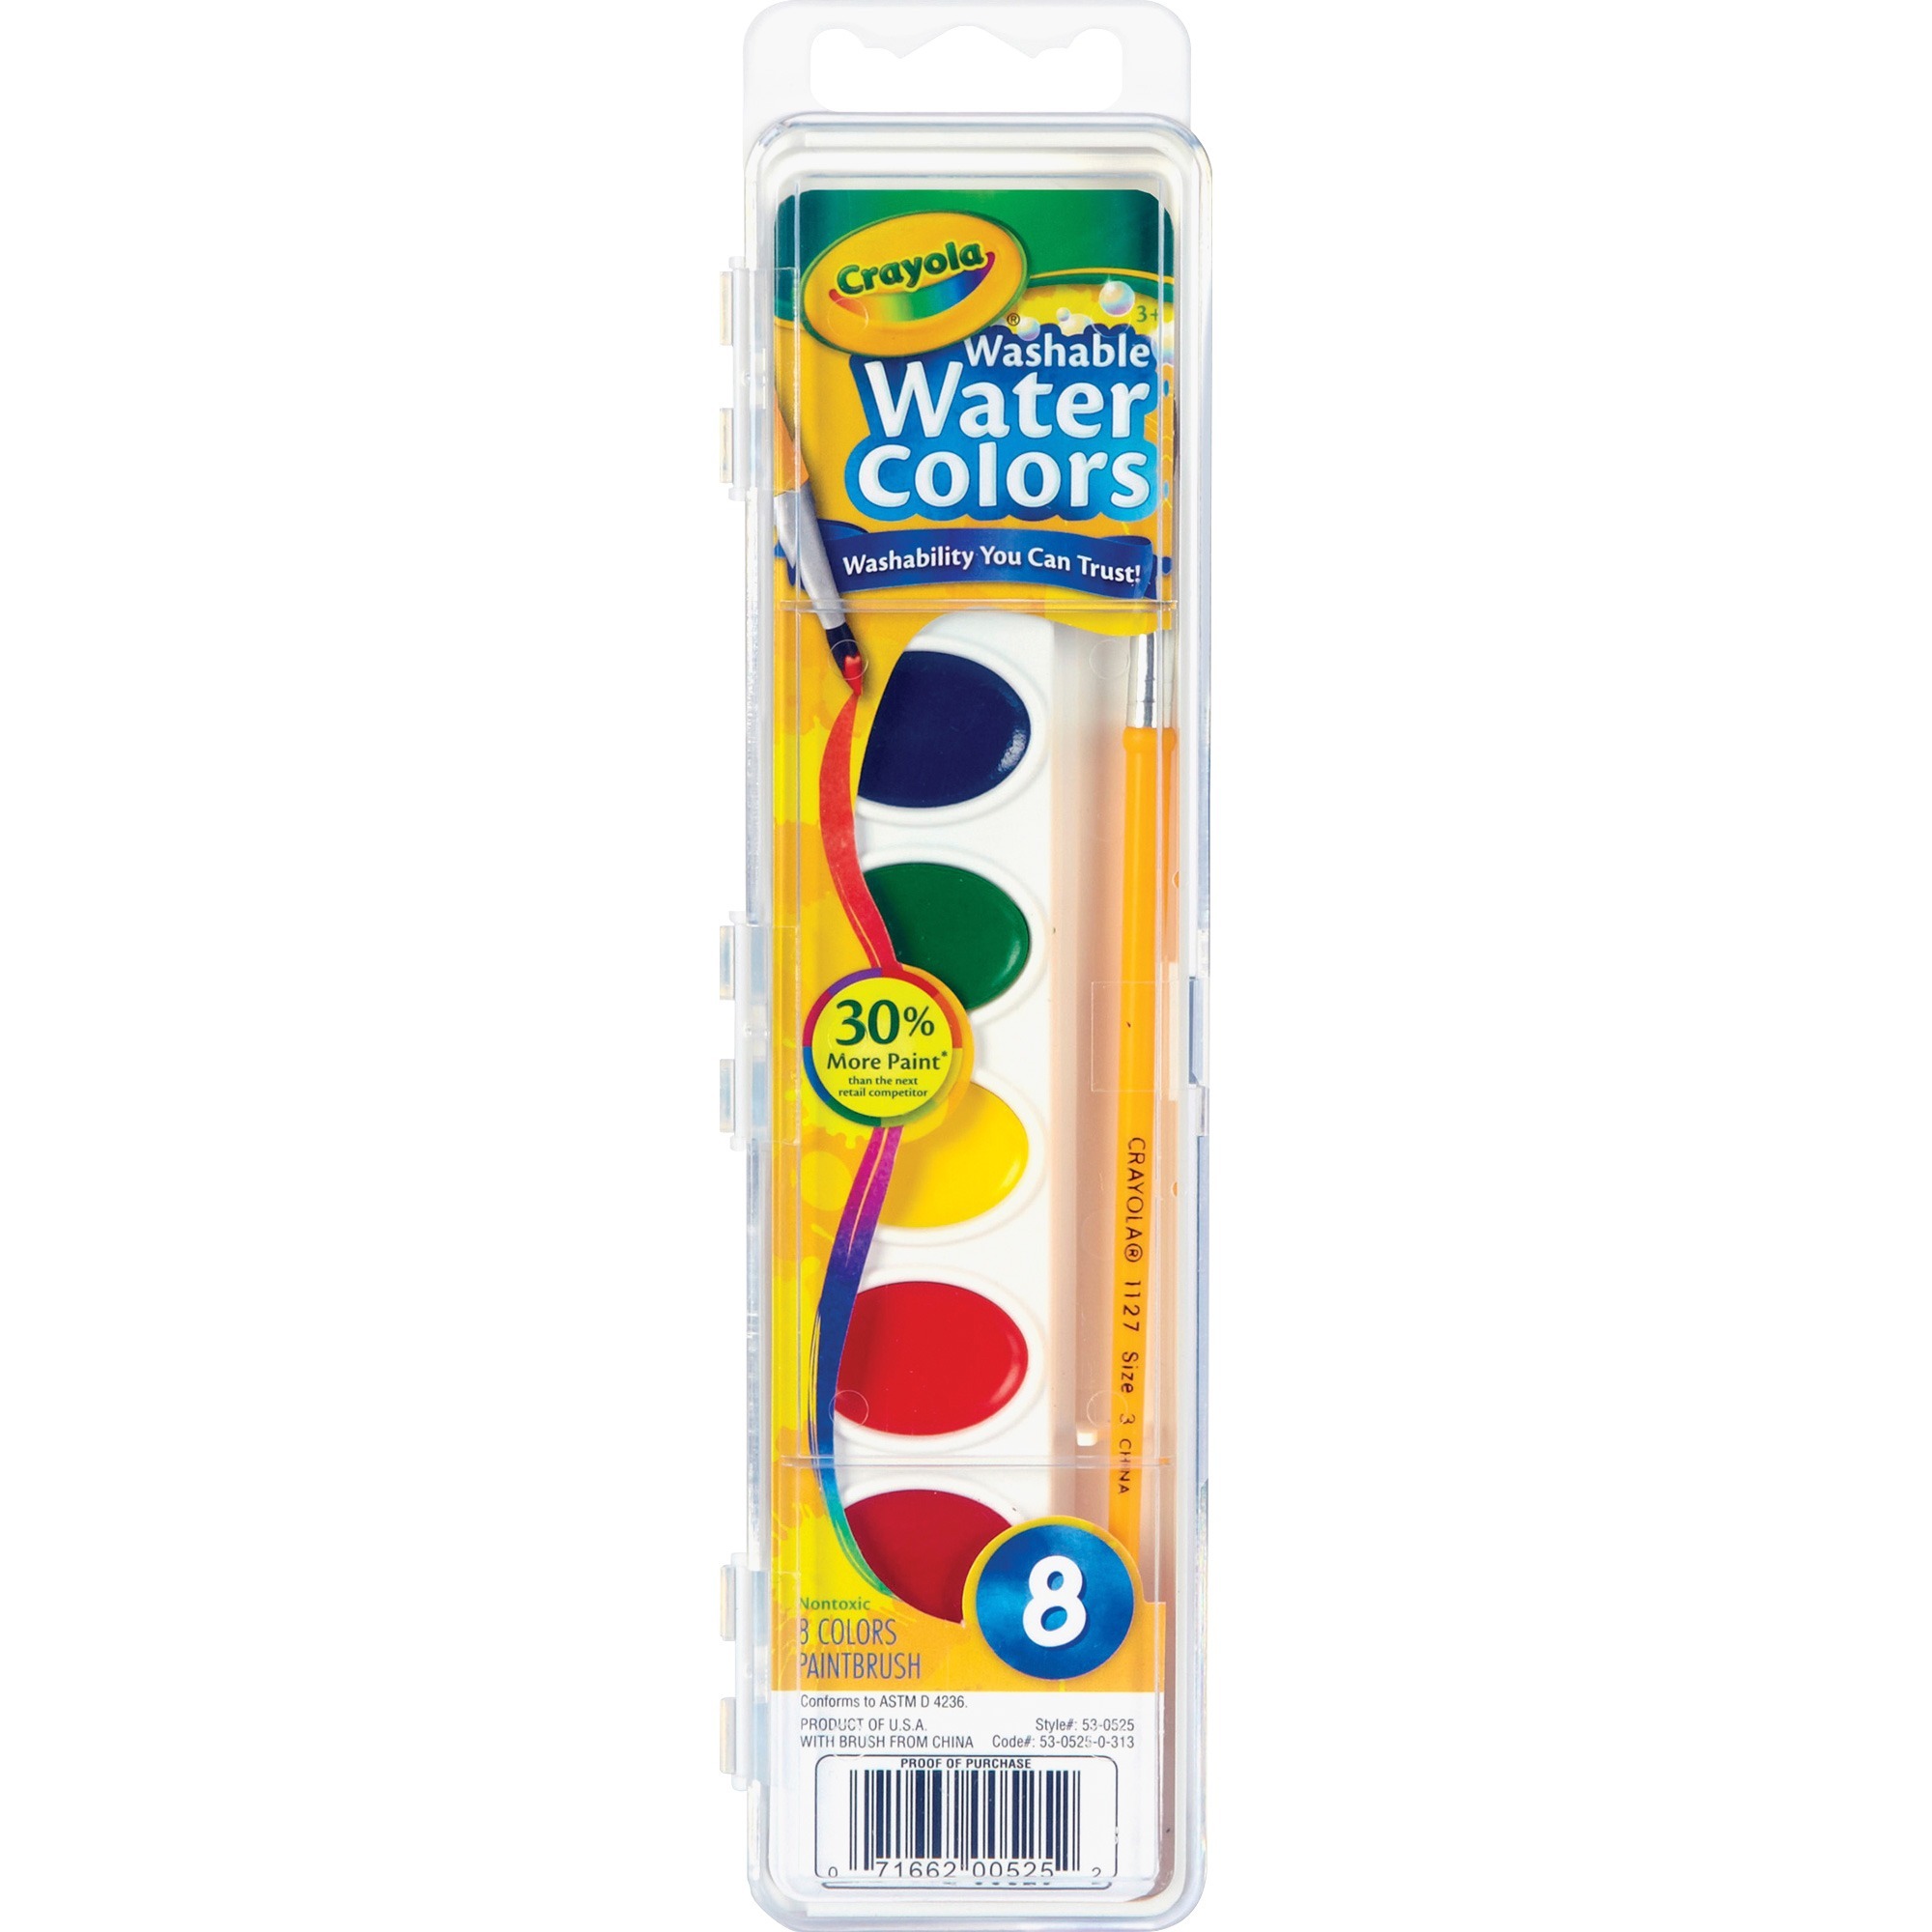 Crayola 16 ct. Washable Watercolor Pans with Plastic Handled Brush